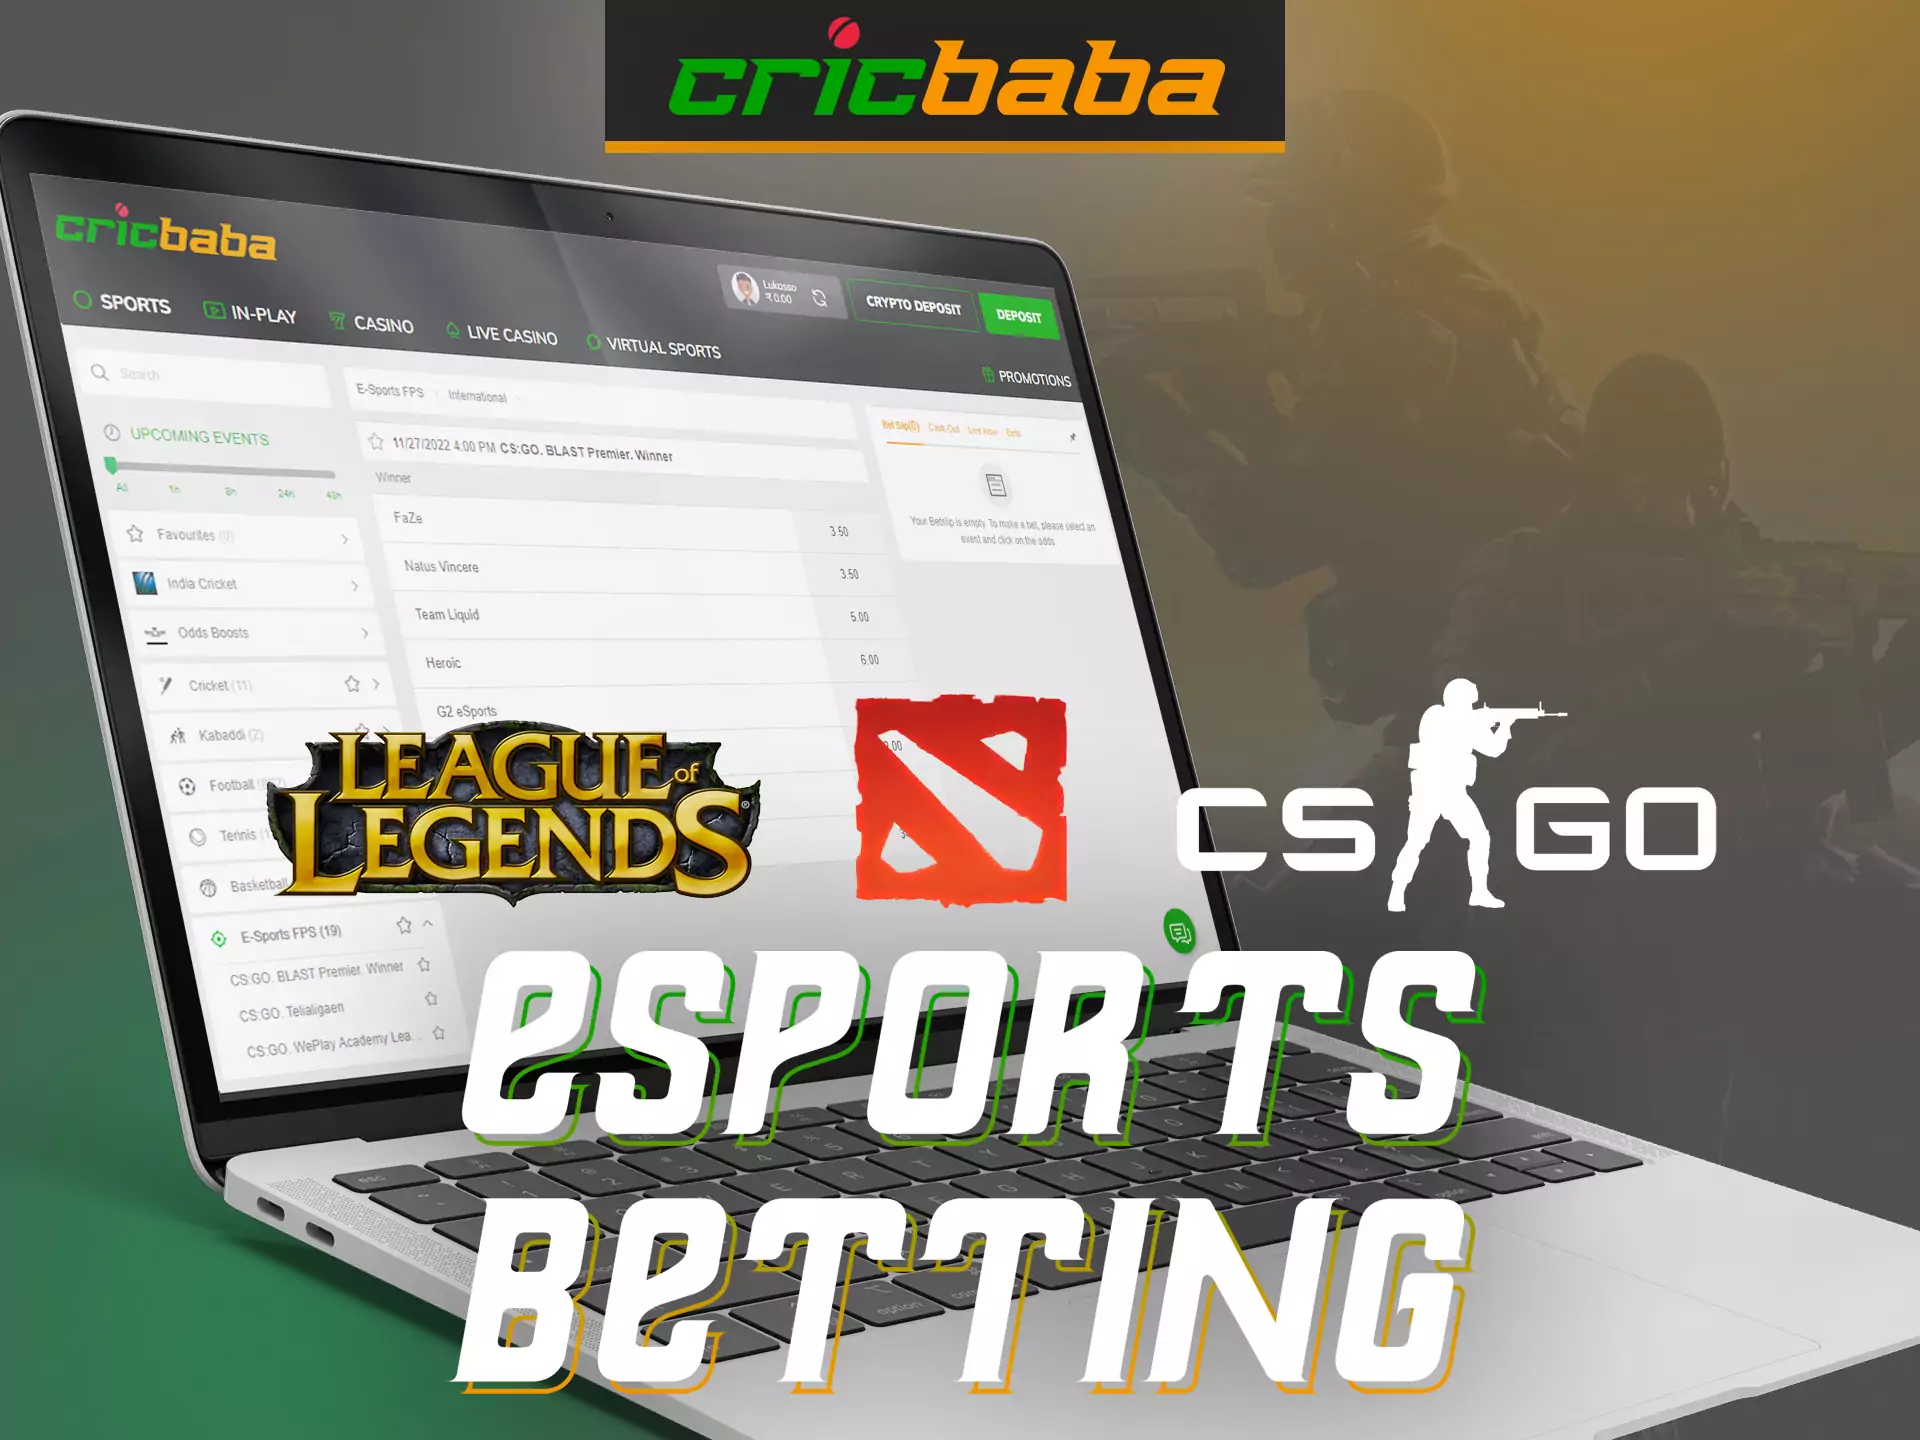 Place bets on your favorite cyber teams in Cricbaba, it's simple.